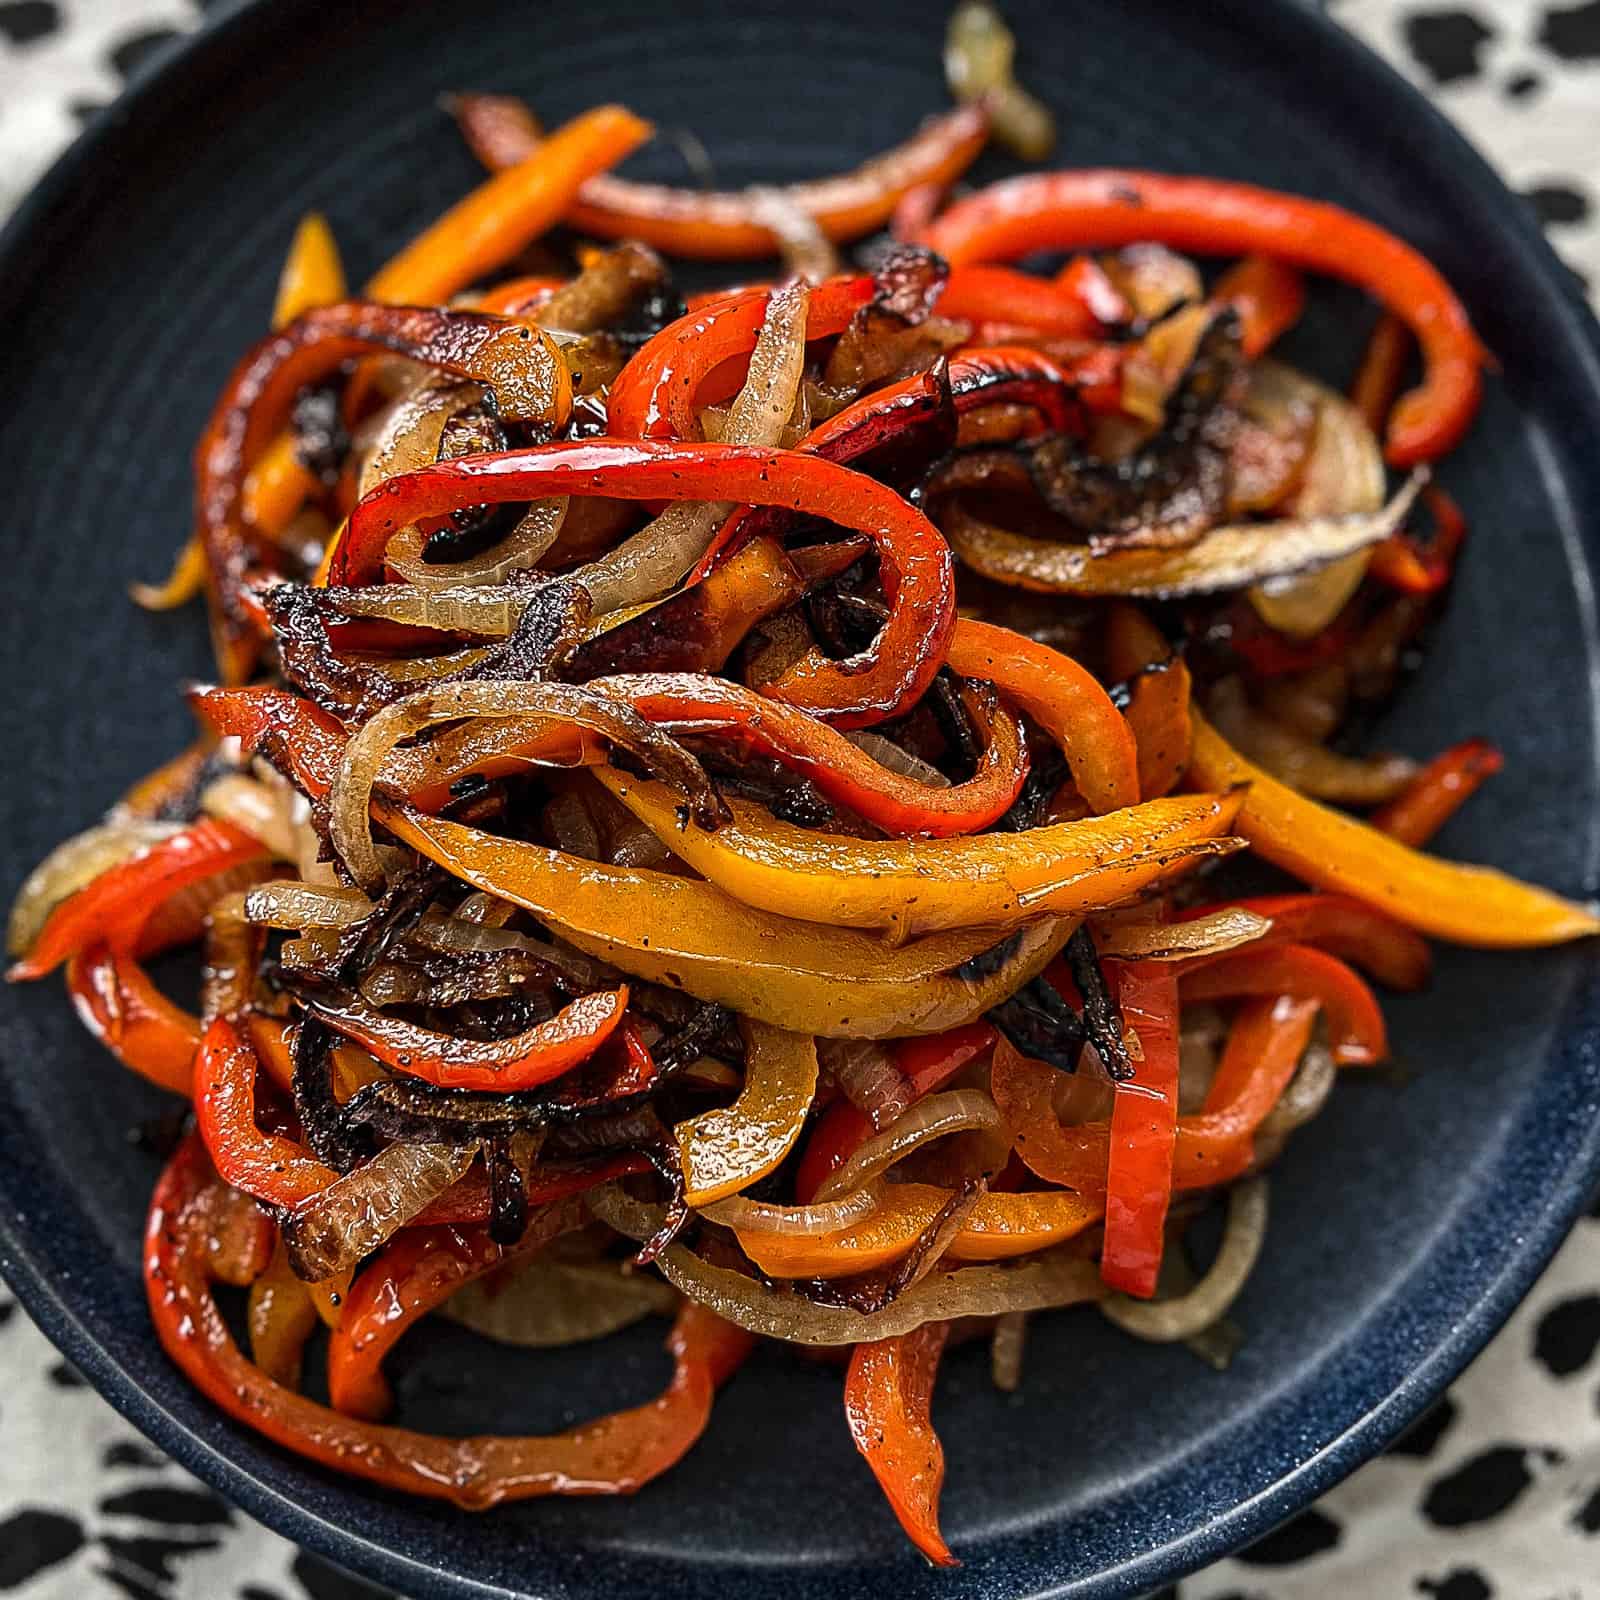 https://sipbitego.com/wp-content/uploads/2023/06/Recipe-for-Making-peppers-and-onions-on-a-Blackstone-griddle-Sip-Bite-Go.jpg